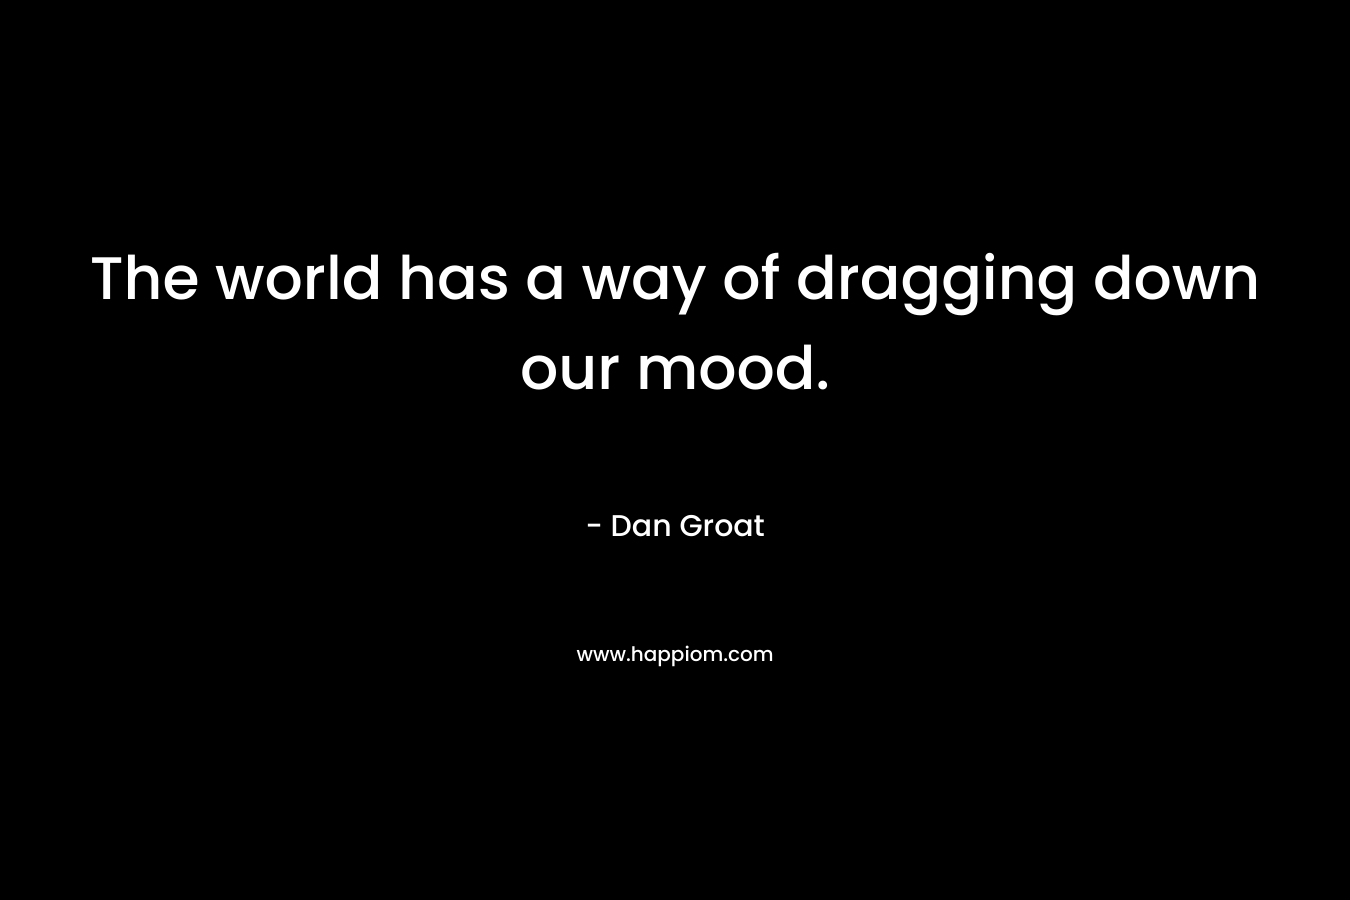 The world has a way of dragging down our mood.